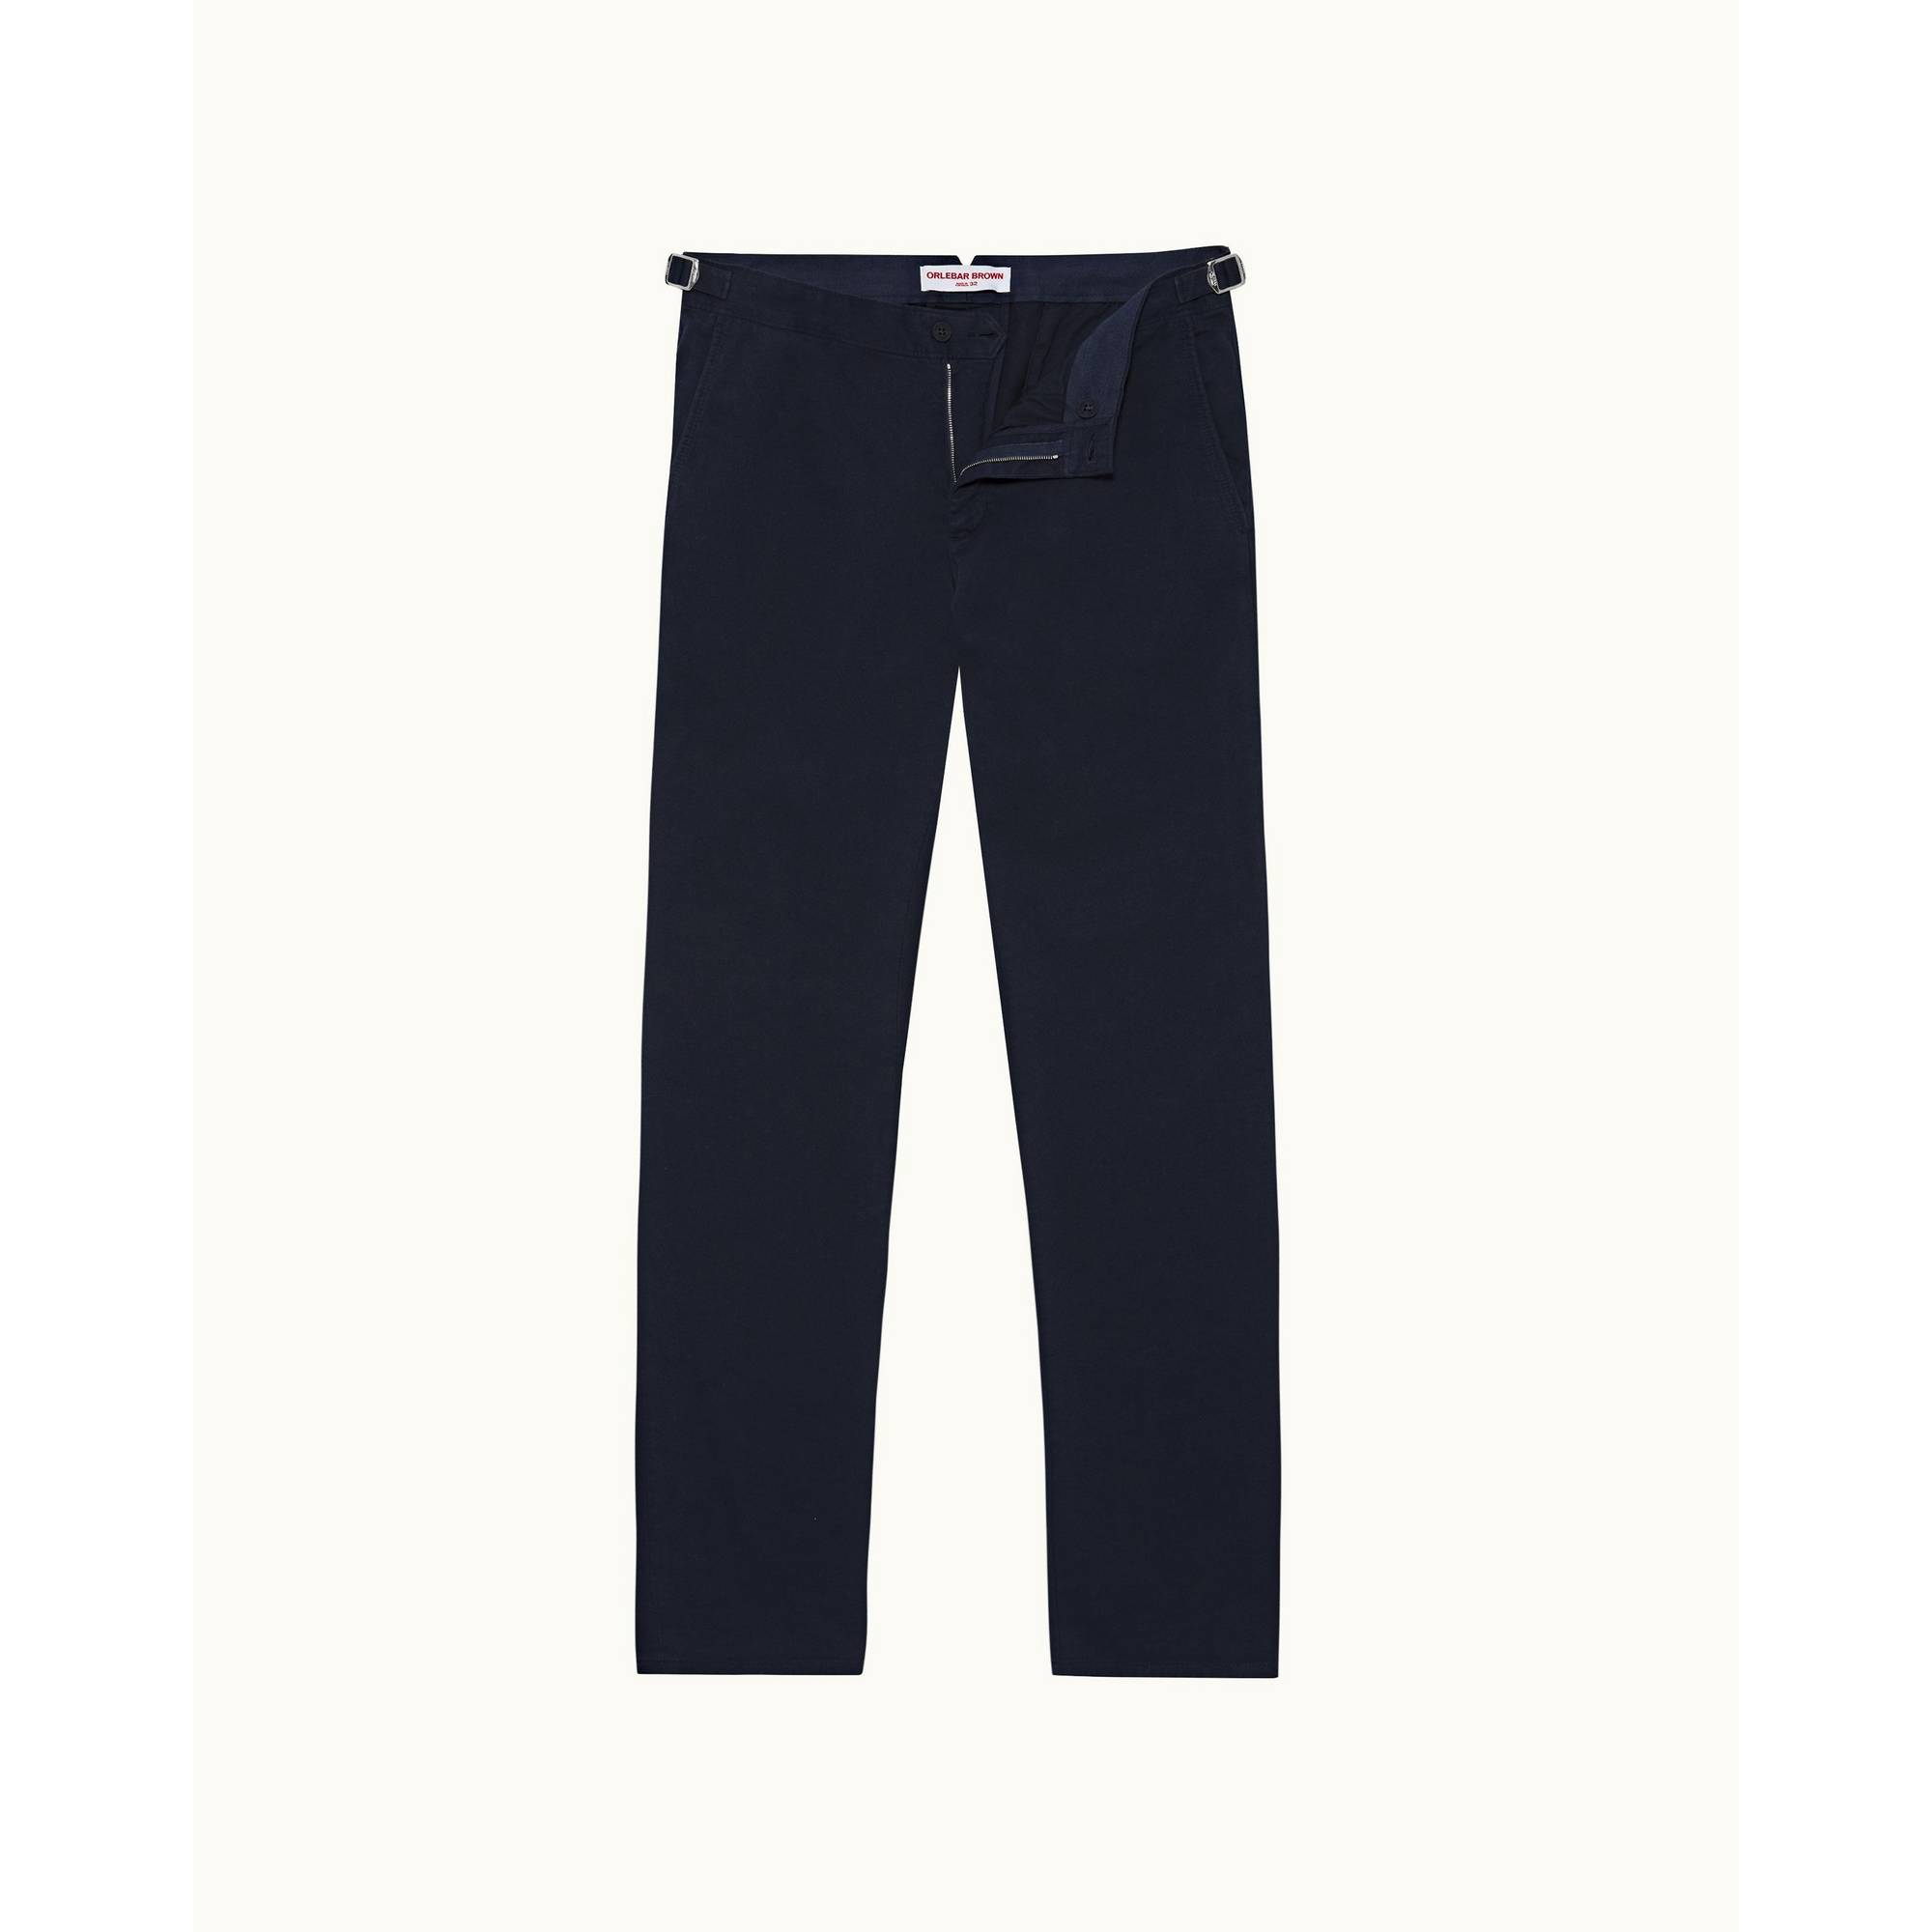 Fallon Stretch - Mens Dark Navy Tailored Fit Stretch-Cotton Chinos